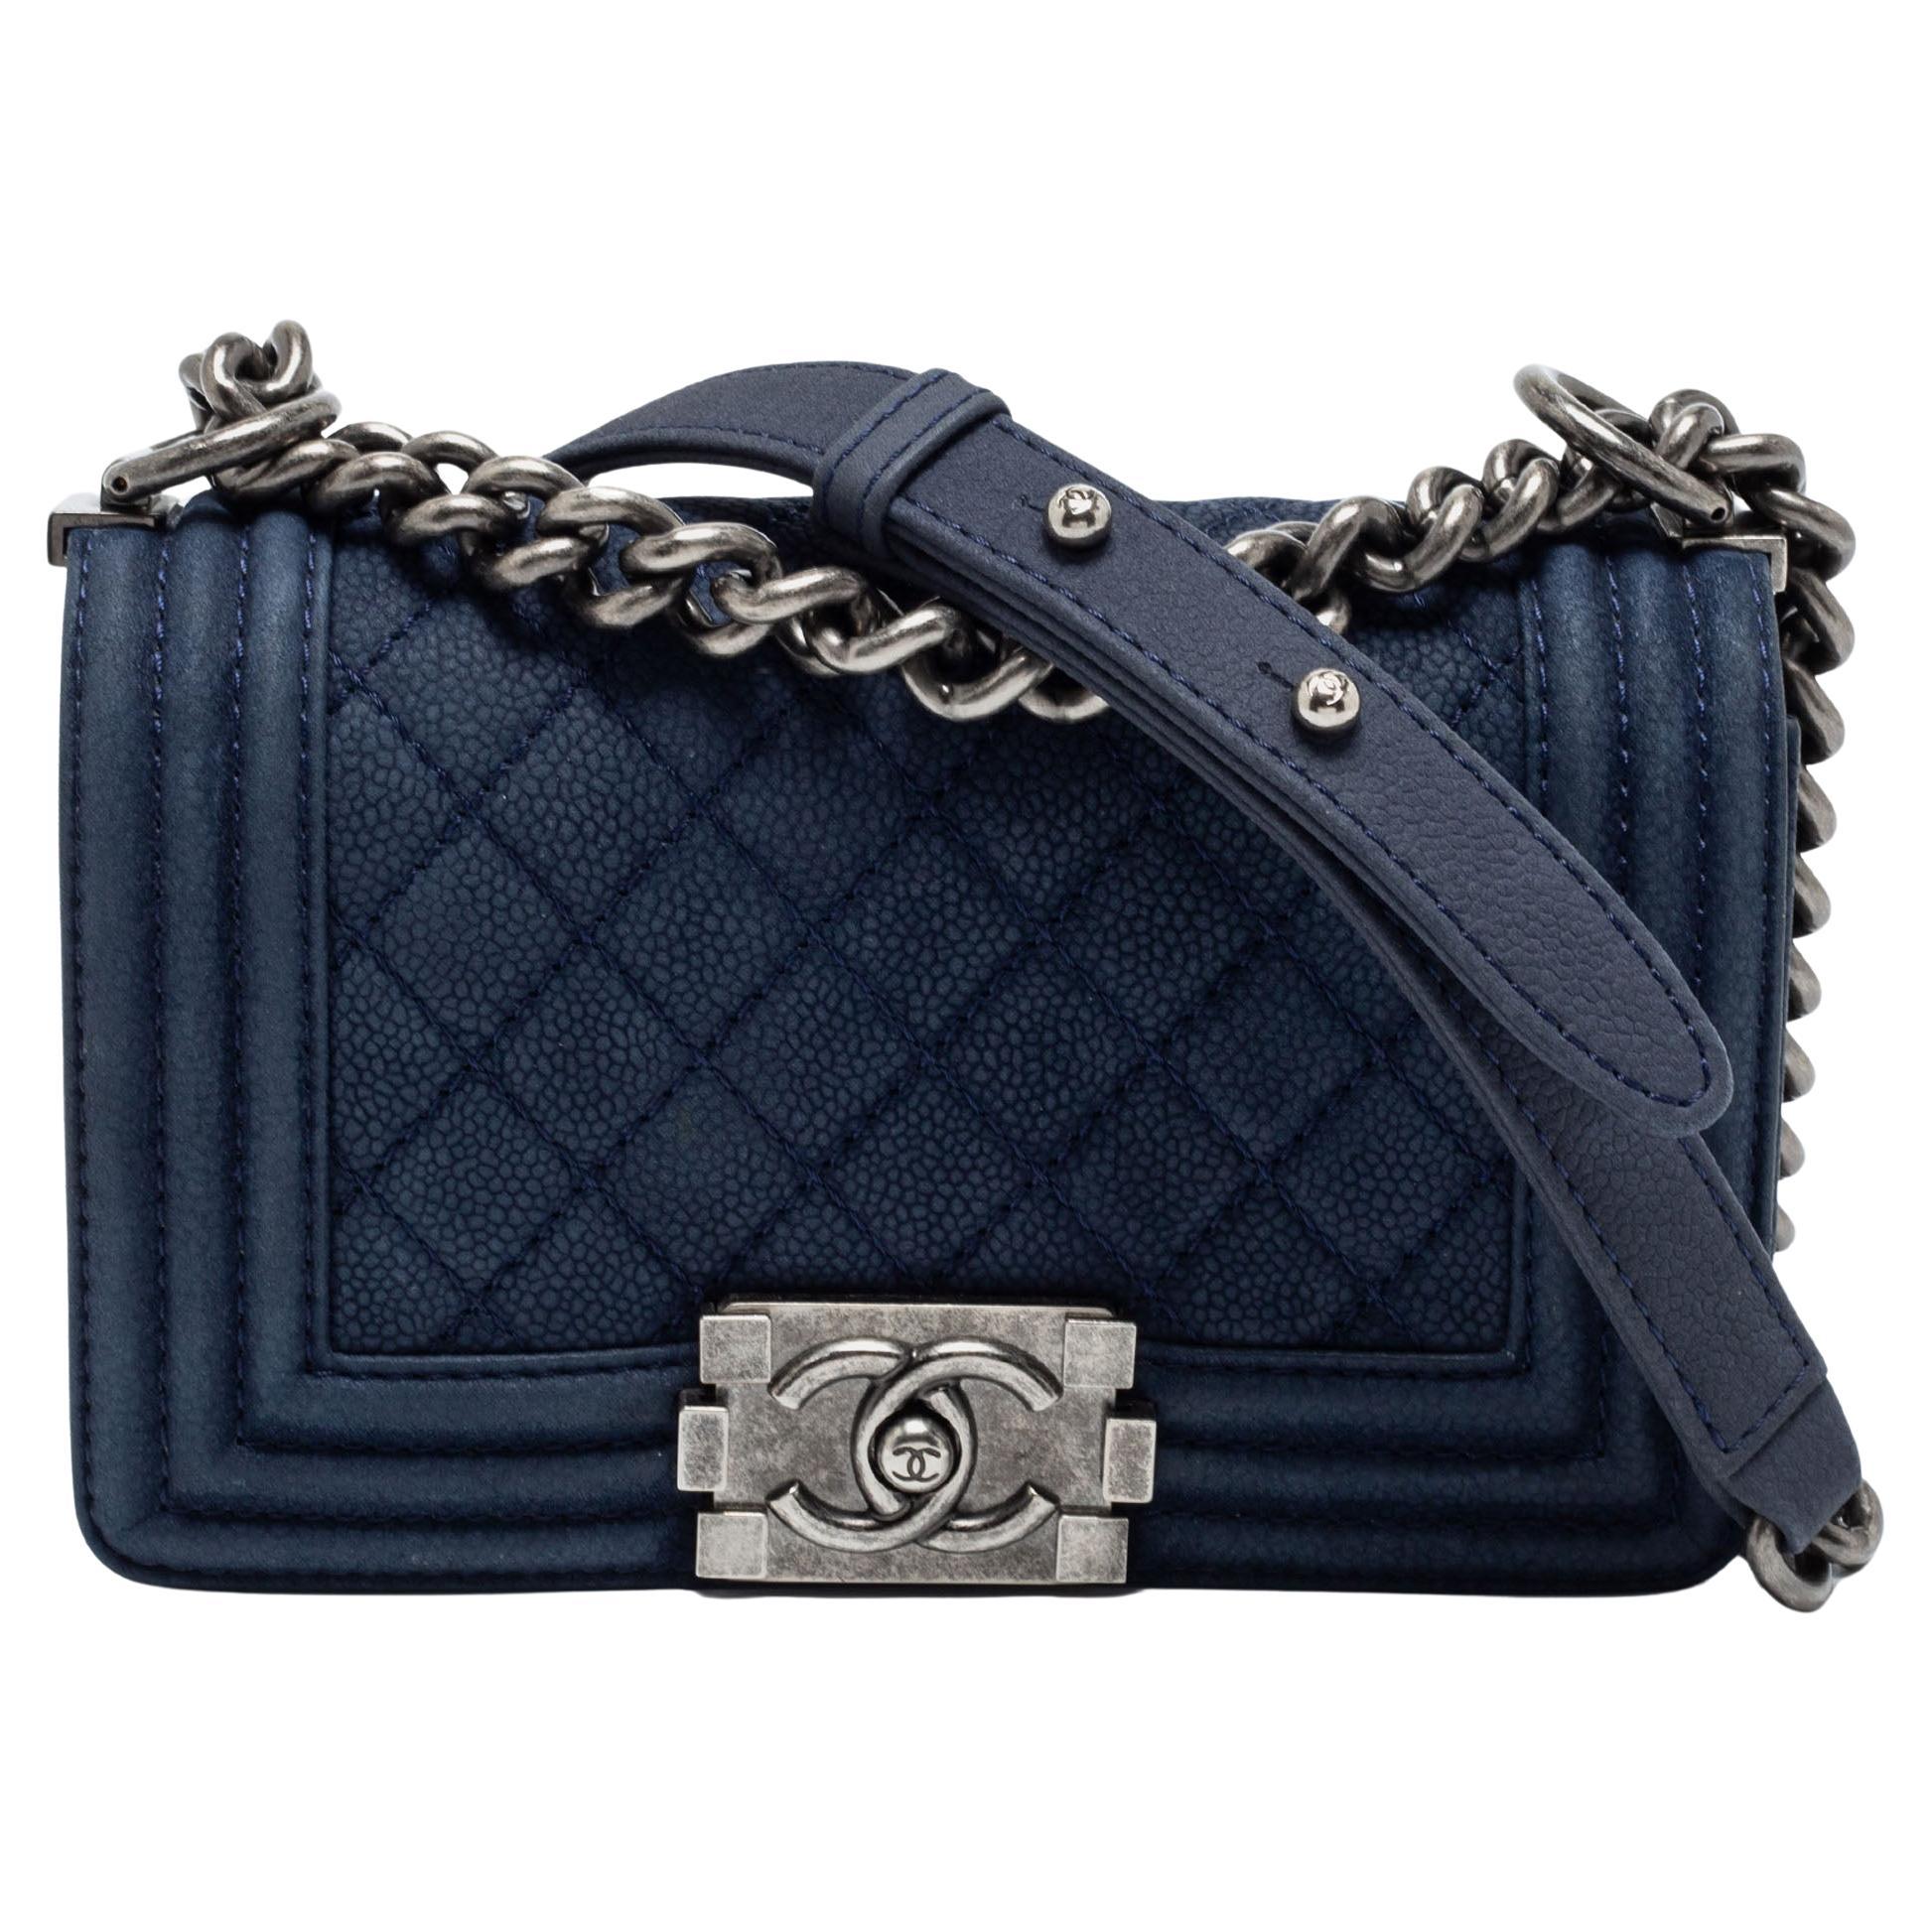 Chanel Blue Quilted Caviar Nubuck Leather Small Boy Flap Bag